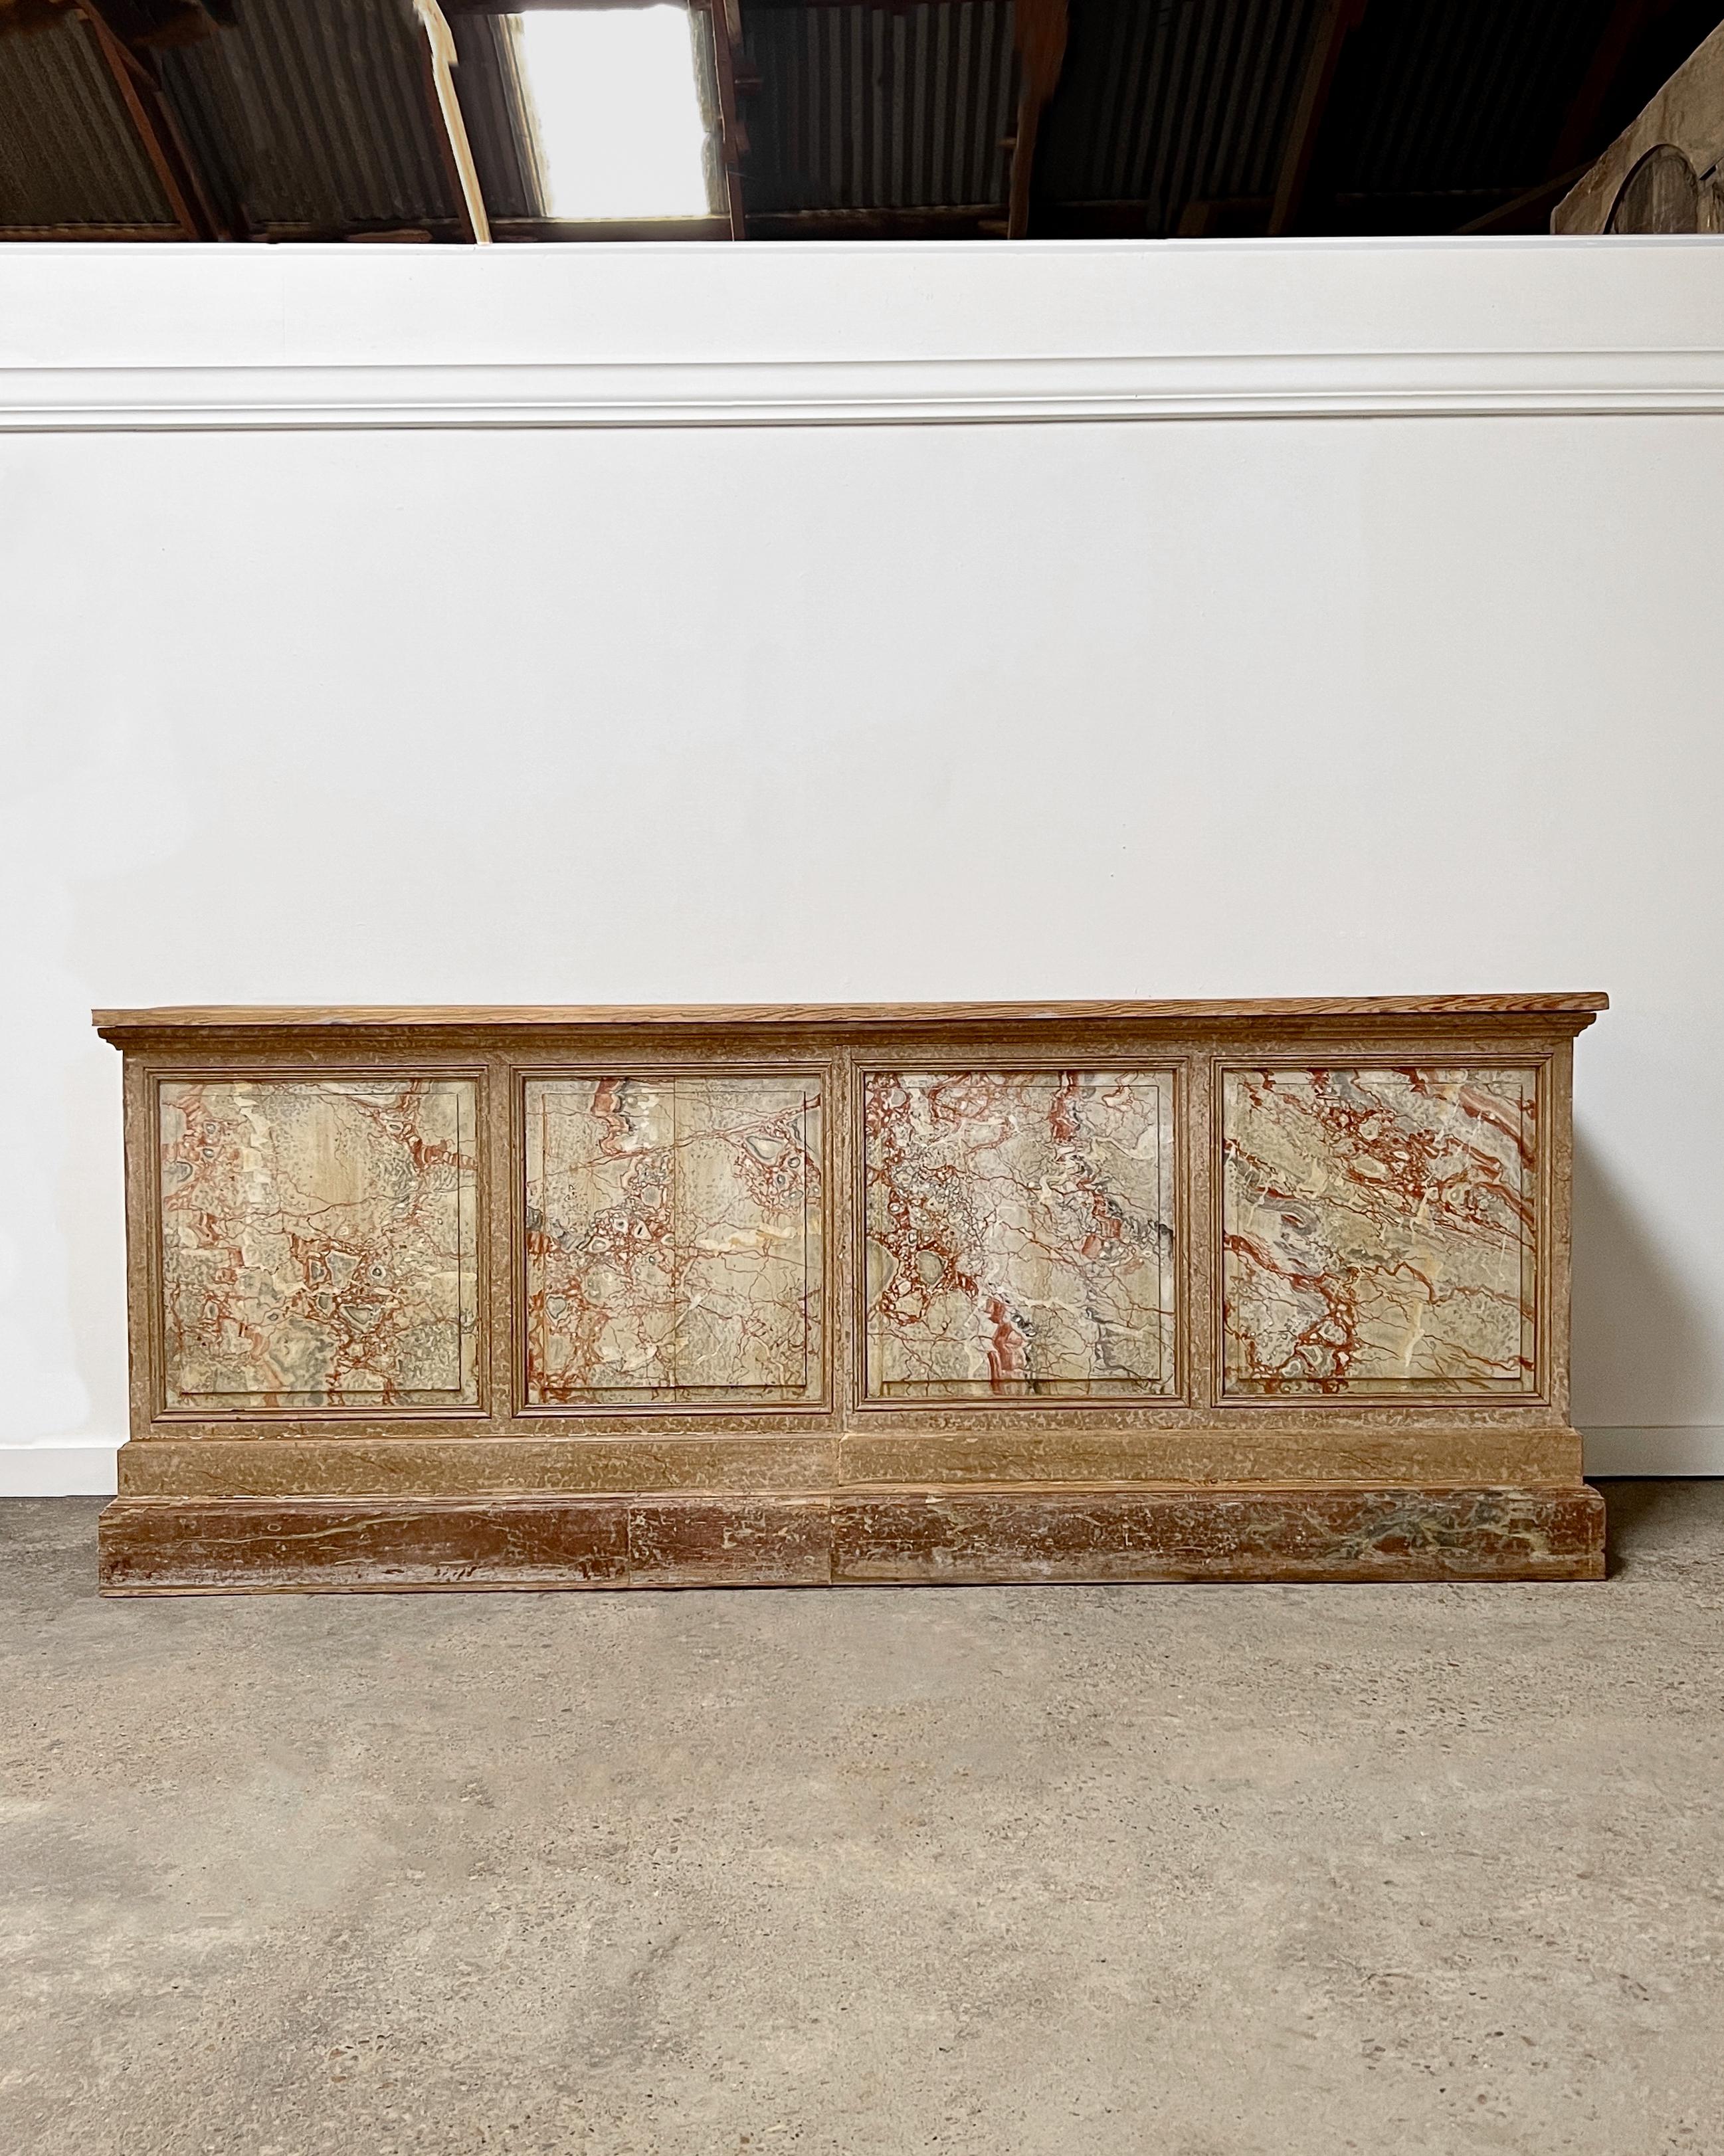 Found in London, this old Victorian-era shop counter is a beautiful, one-of-a-kind, statement-making piece that will add a sense of history to your home’s story!

A wonderful faux paint finish decorates the frame and decorative beveled molding of